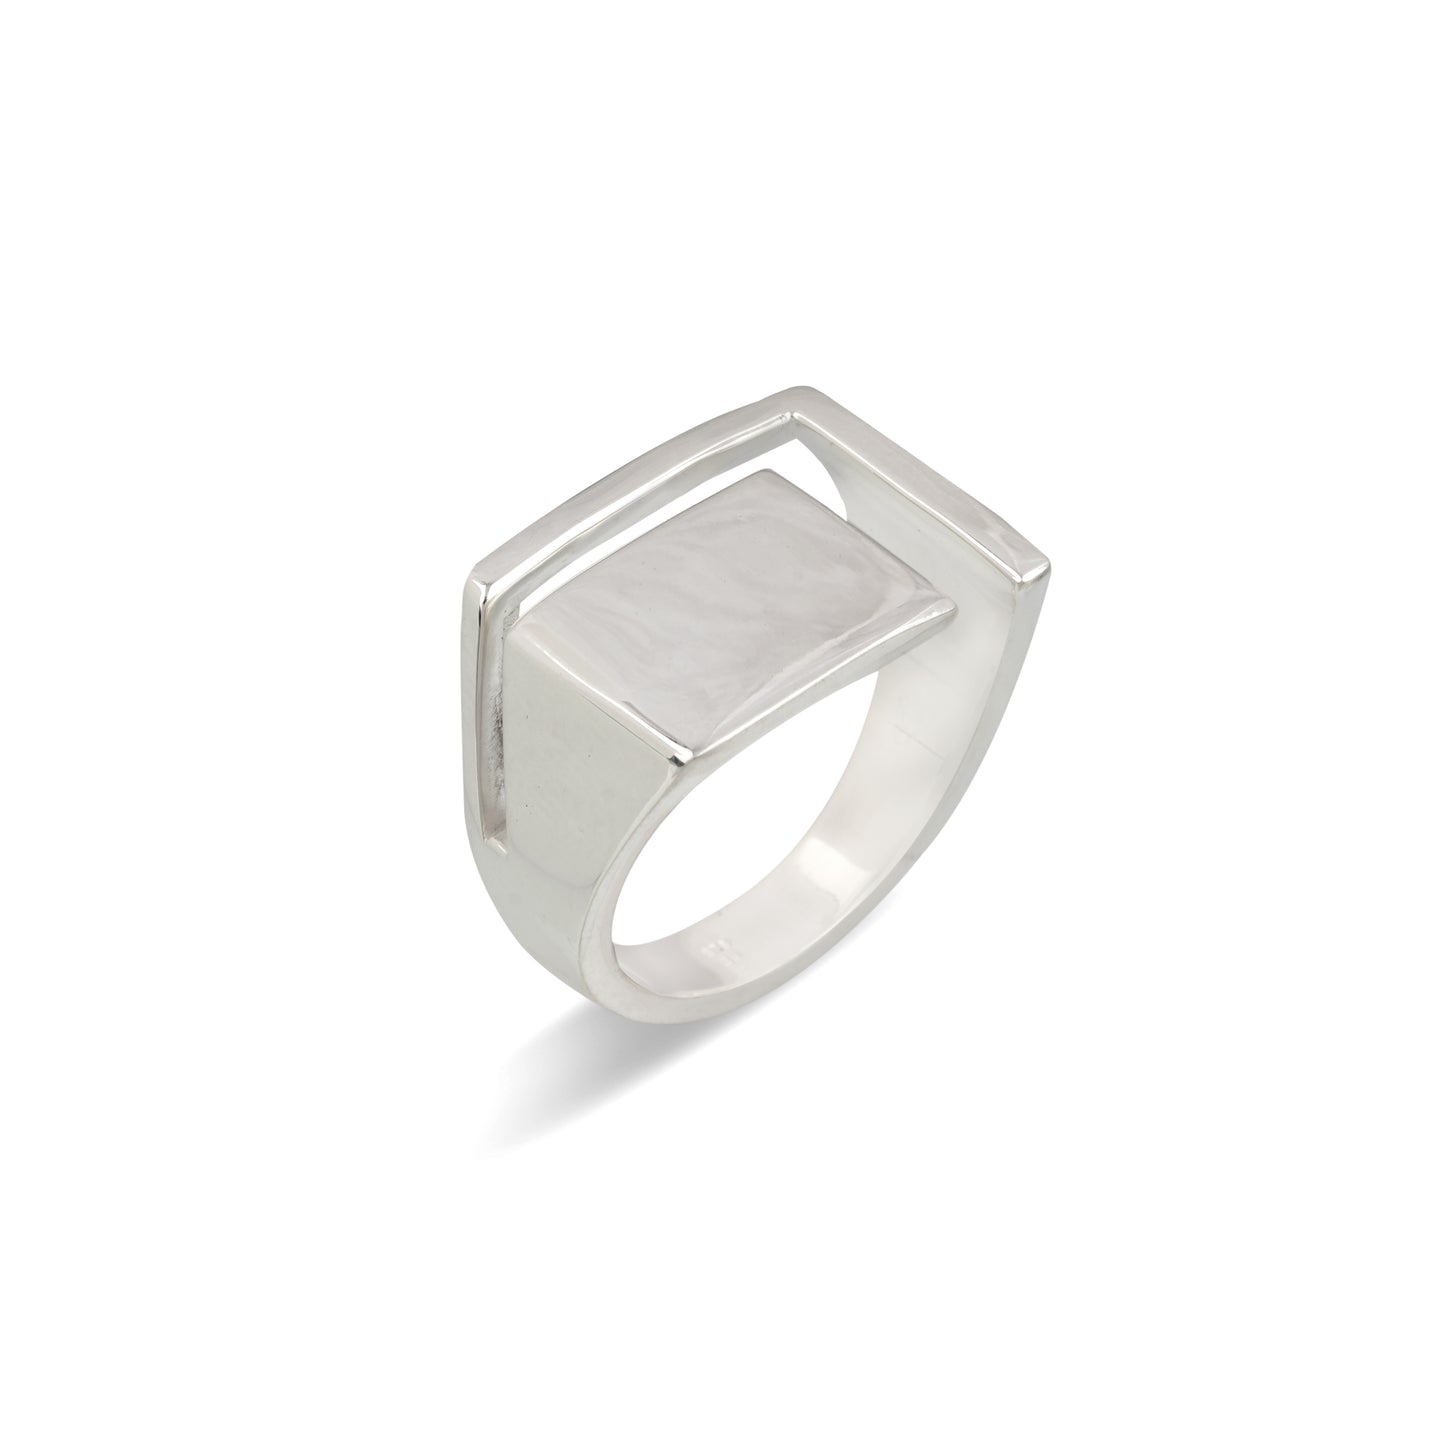 Sparkleens- Silver Rectangle Ring.